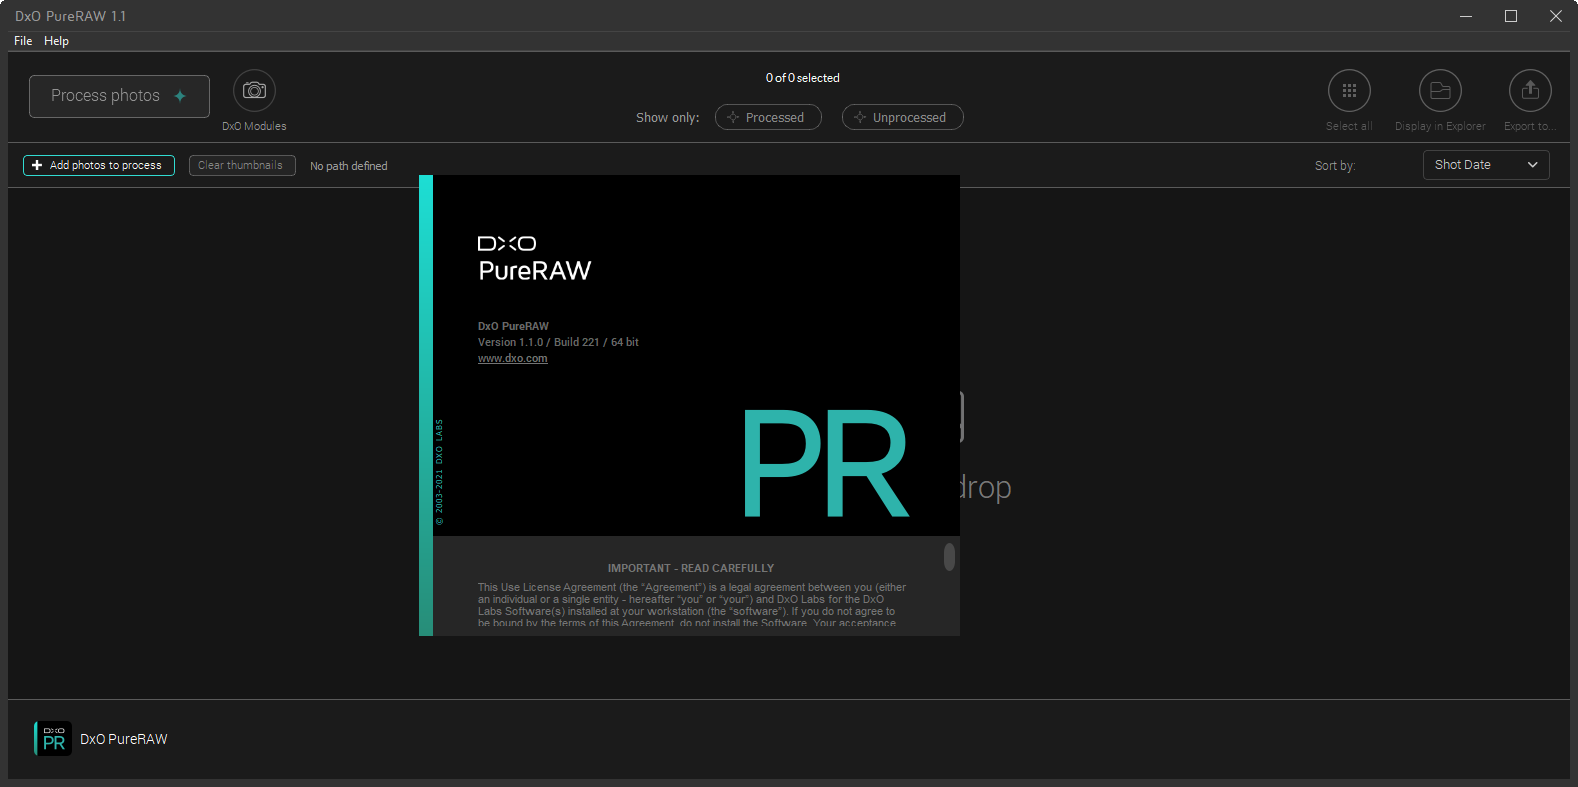 DxO PureRAW 3.4.0.16 download the new for windows